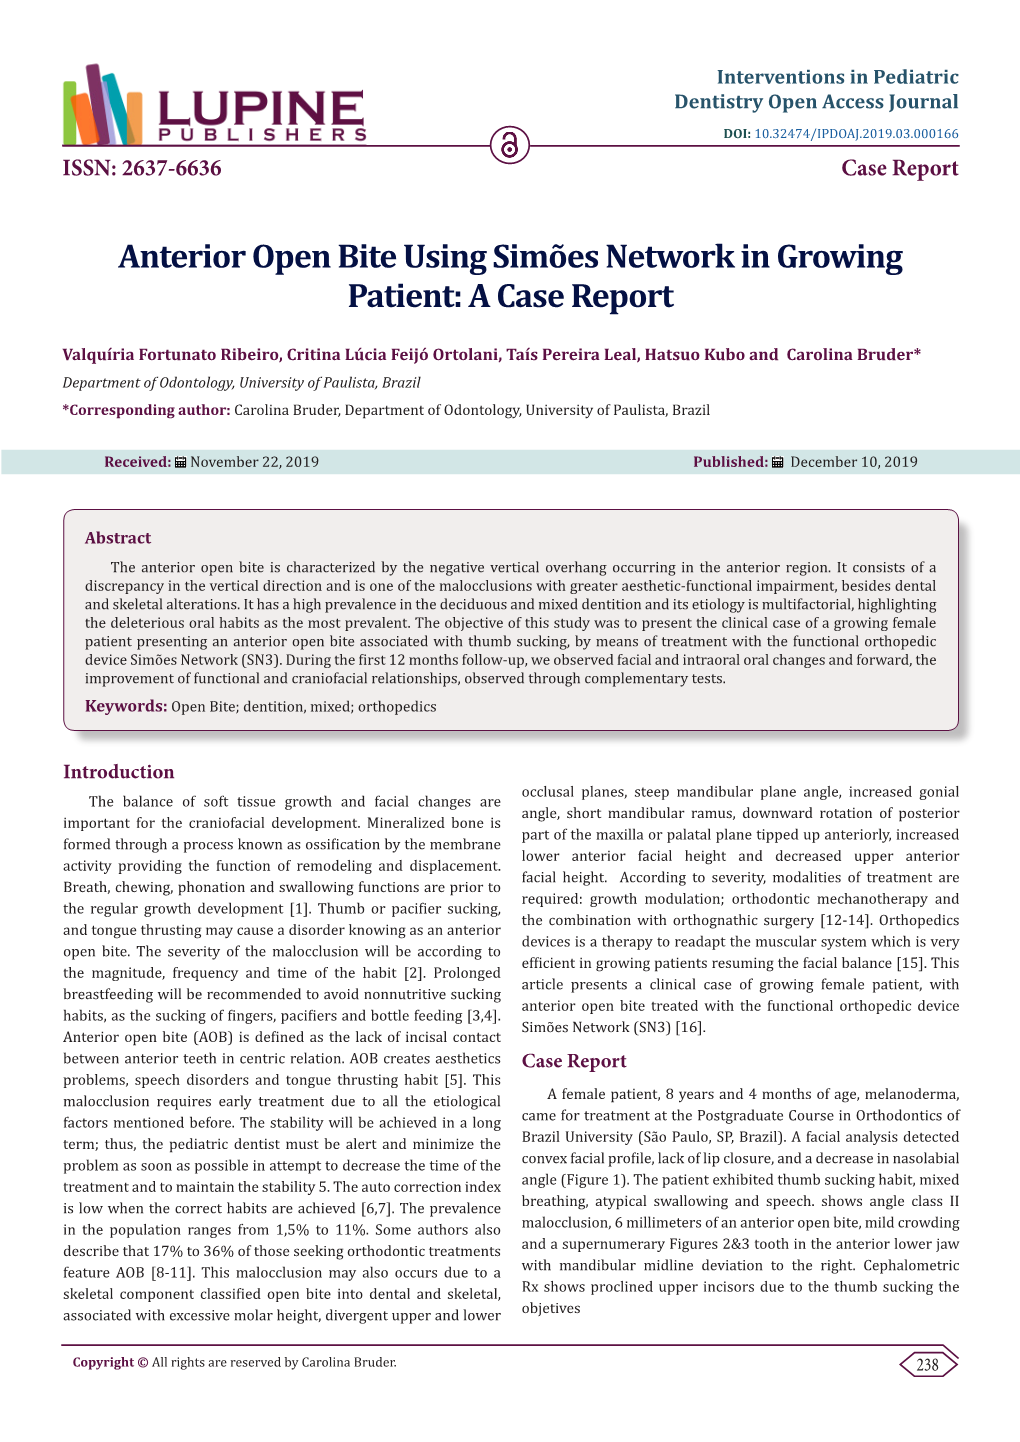 Anterior Open Bite Using Simões Network in Growing Patient: a Case Report